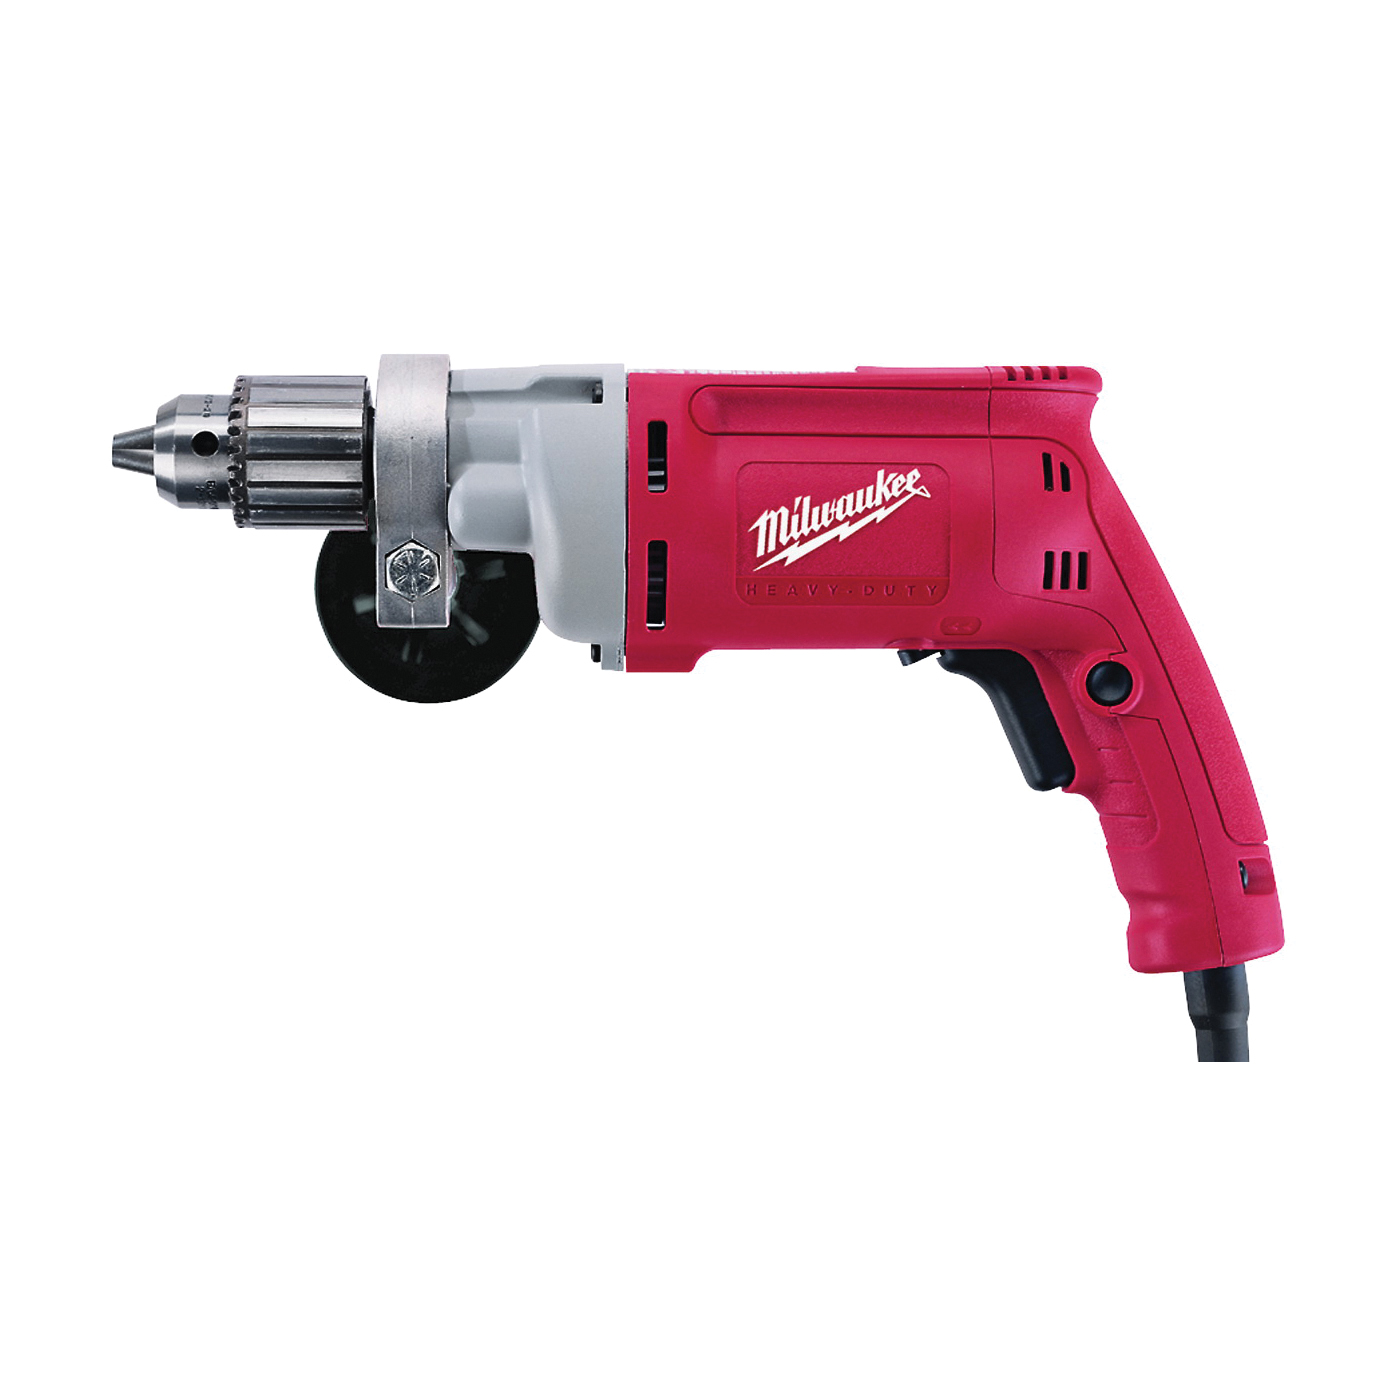 0299-20 Electric Drill, 8 A, 1/2 in Chuck, Keyed Chuck, 8 ft L Cord